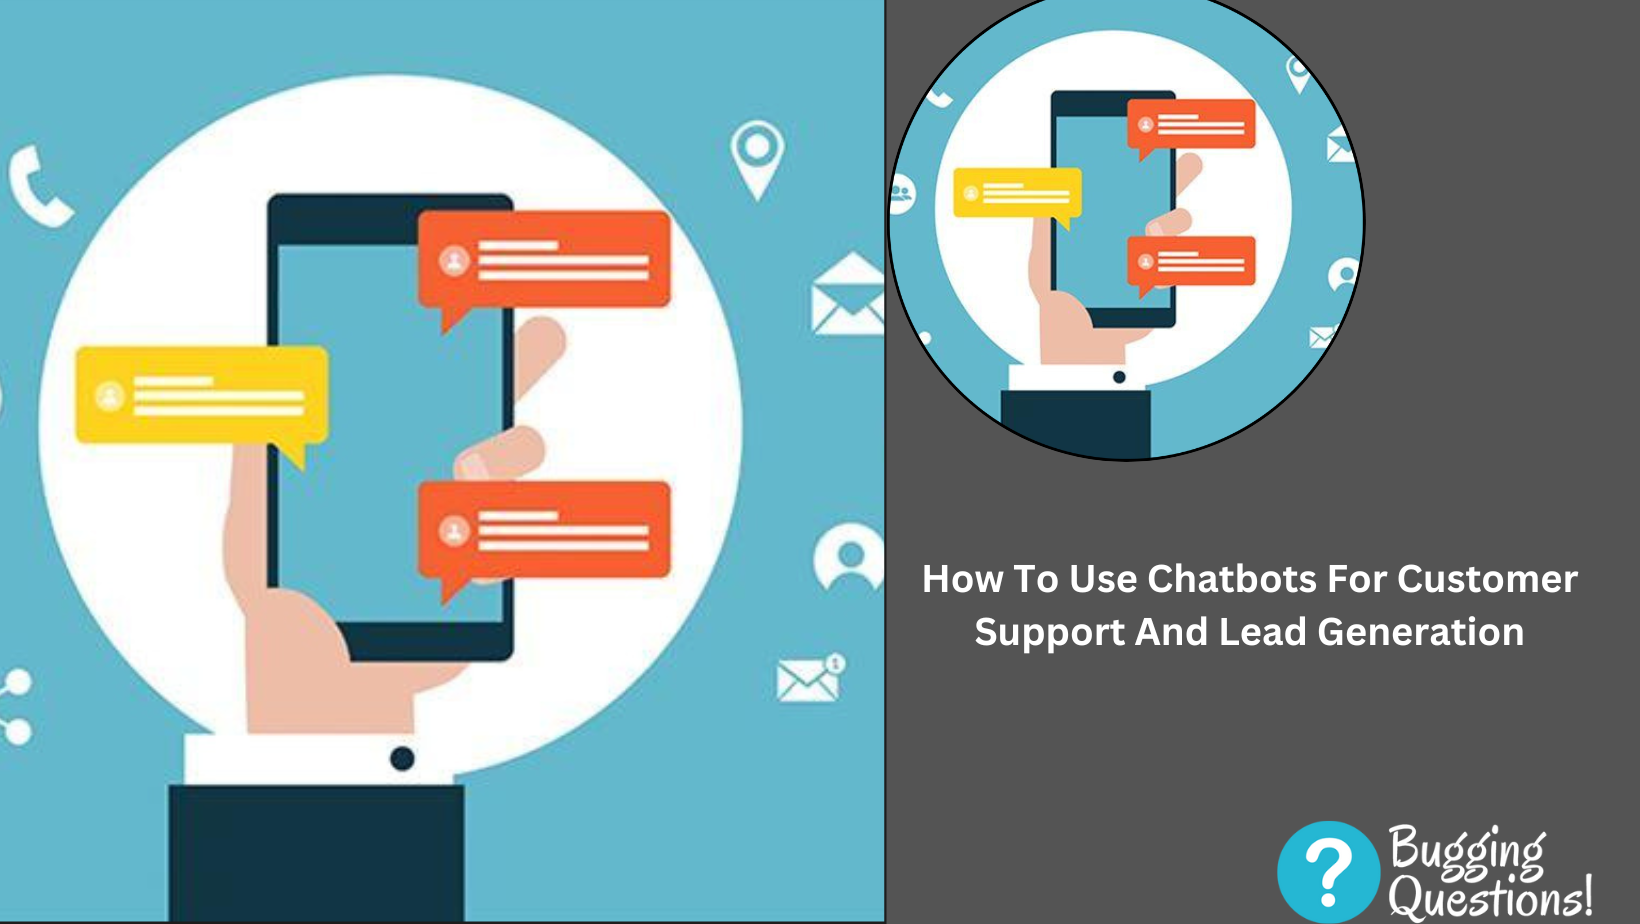 How To Use Chatbots For Customer Support And Lead Generation